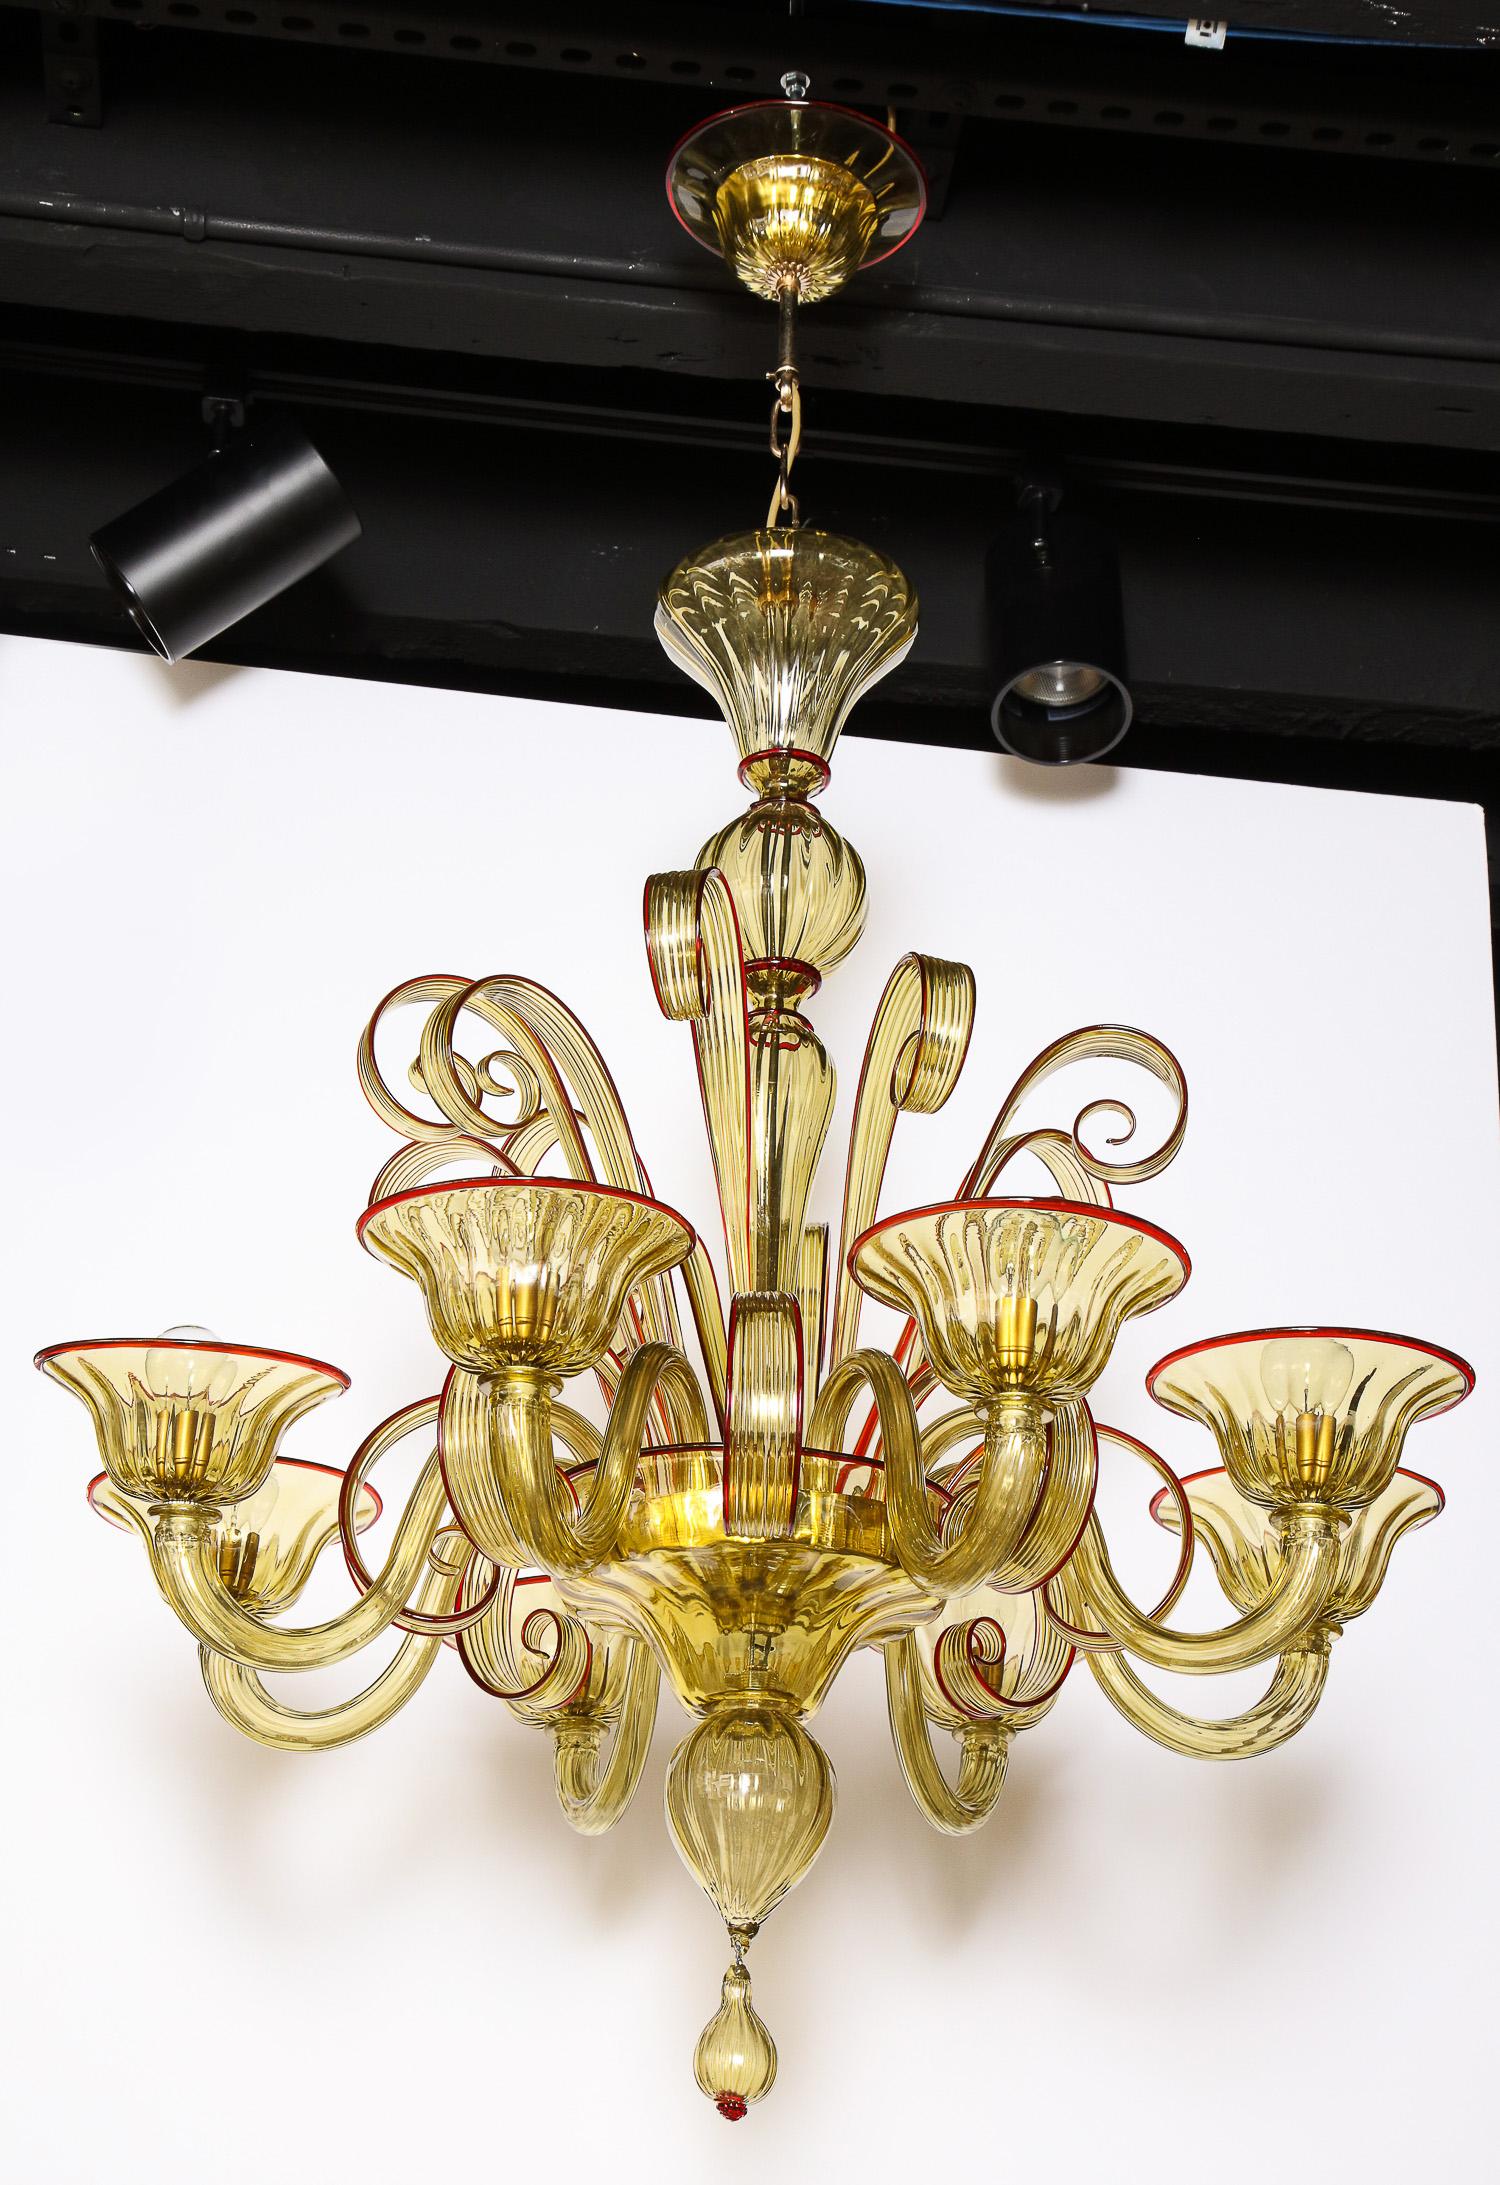 Venetian Glass Chandelier, Amber Color/Red, Contemporary, 8 Arms, Murano, Italy For Sale 10